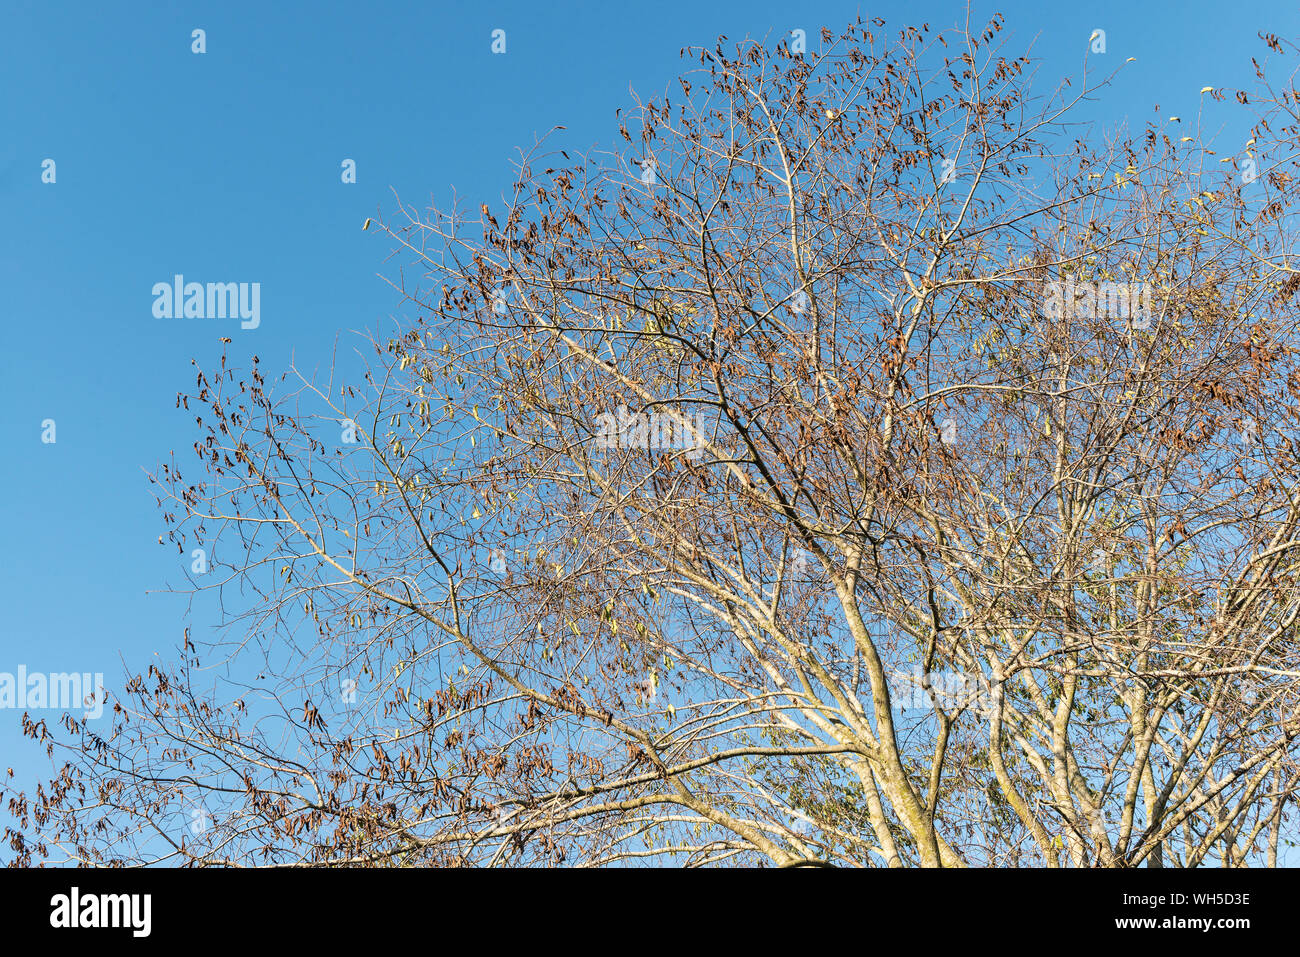 Ash tree (Fraxinus excelsior) severely affected by ash dieback disease (Hymenoscyphus fraxineus) on the border between Herefordshire and Powys, UK Stock Photo